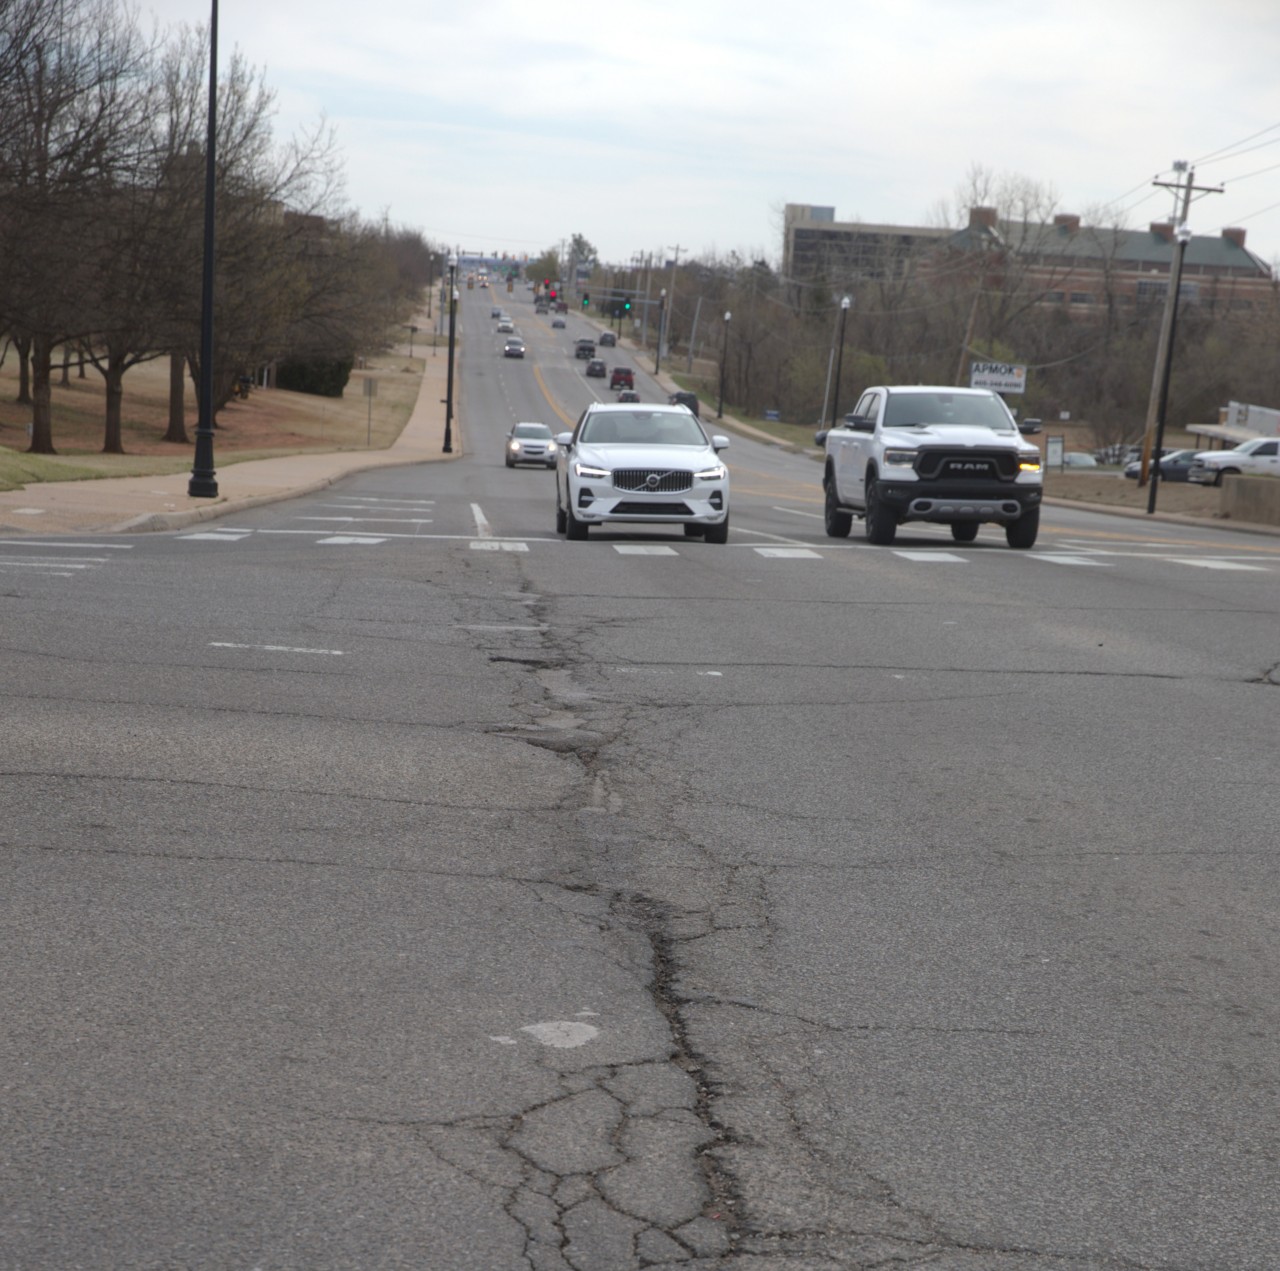 US-77/SH-66/Second St. in Edmond will be resurfaced this spring and summer.